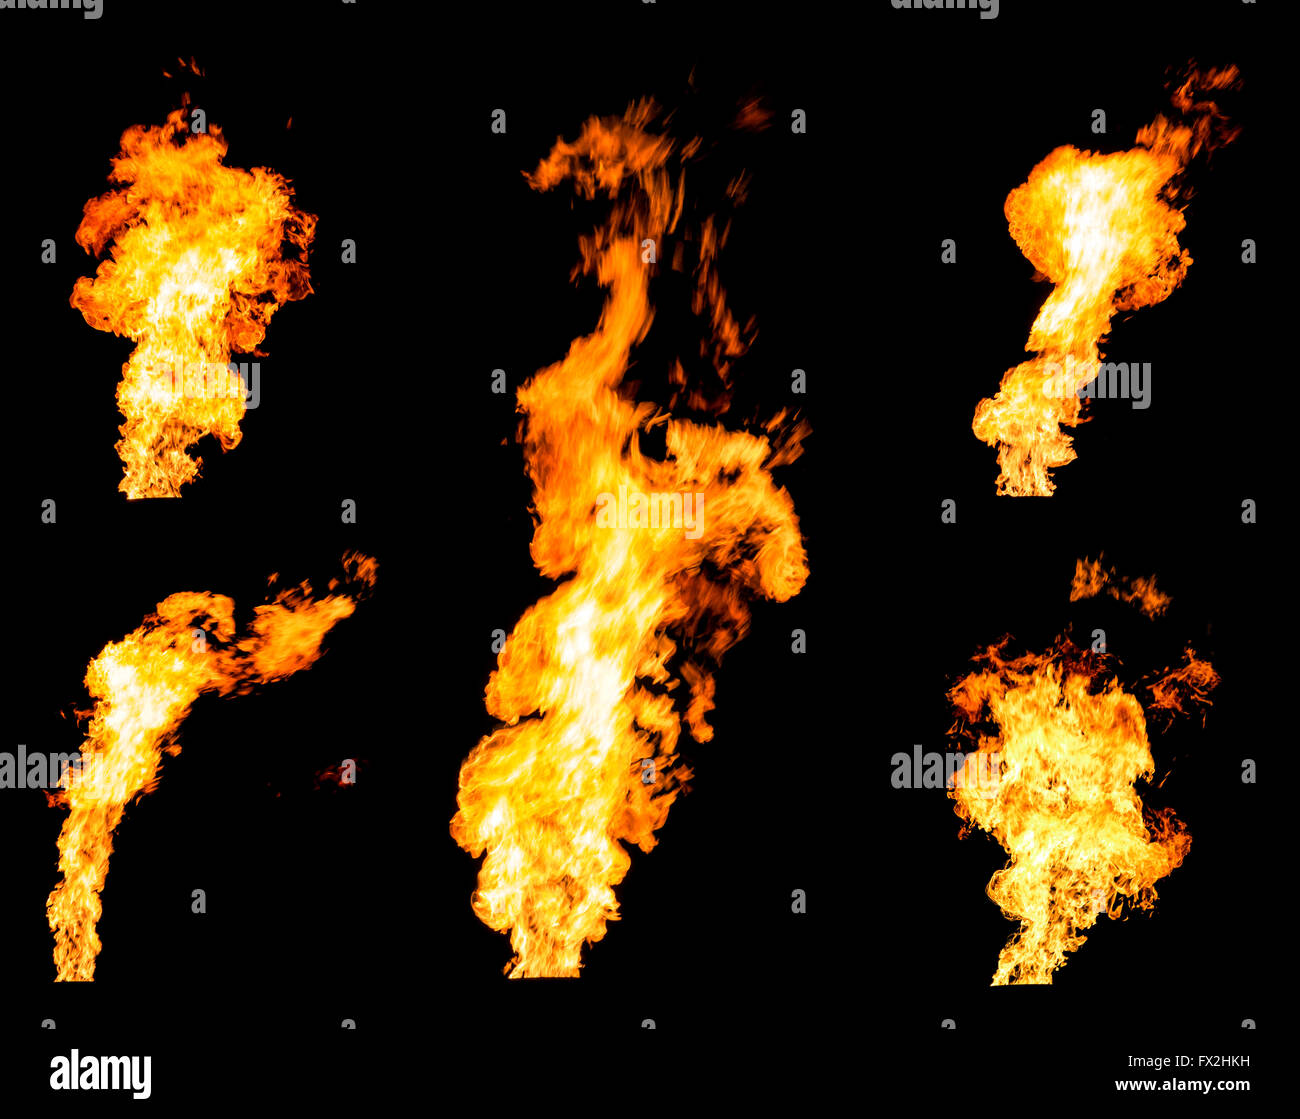 Set of gas flares blazing fire spurts and glowing flames photo set isolated on black background Stock Photo